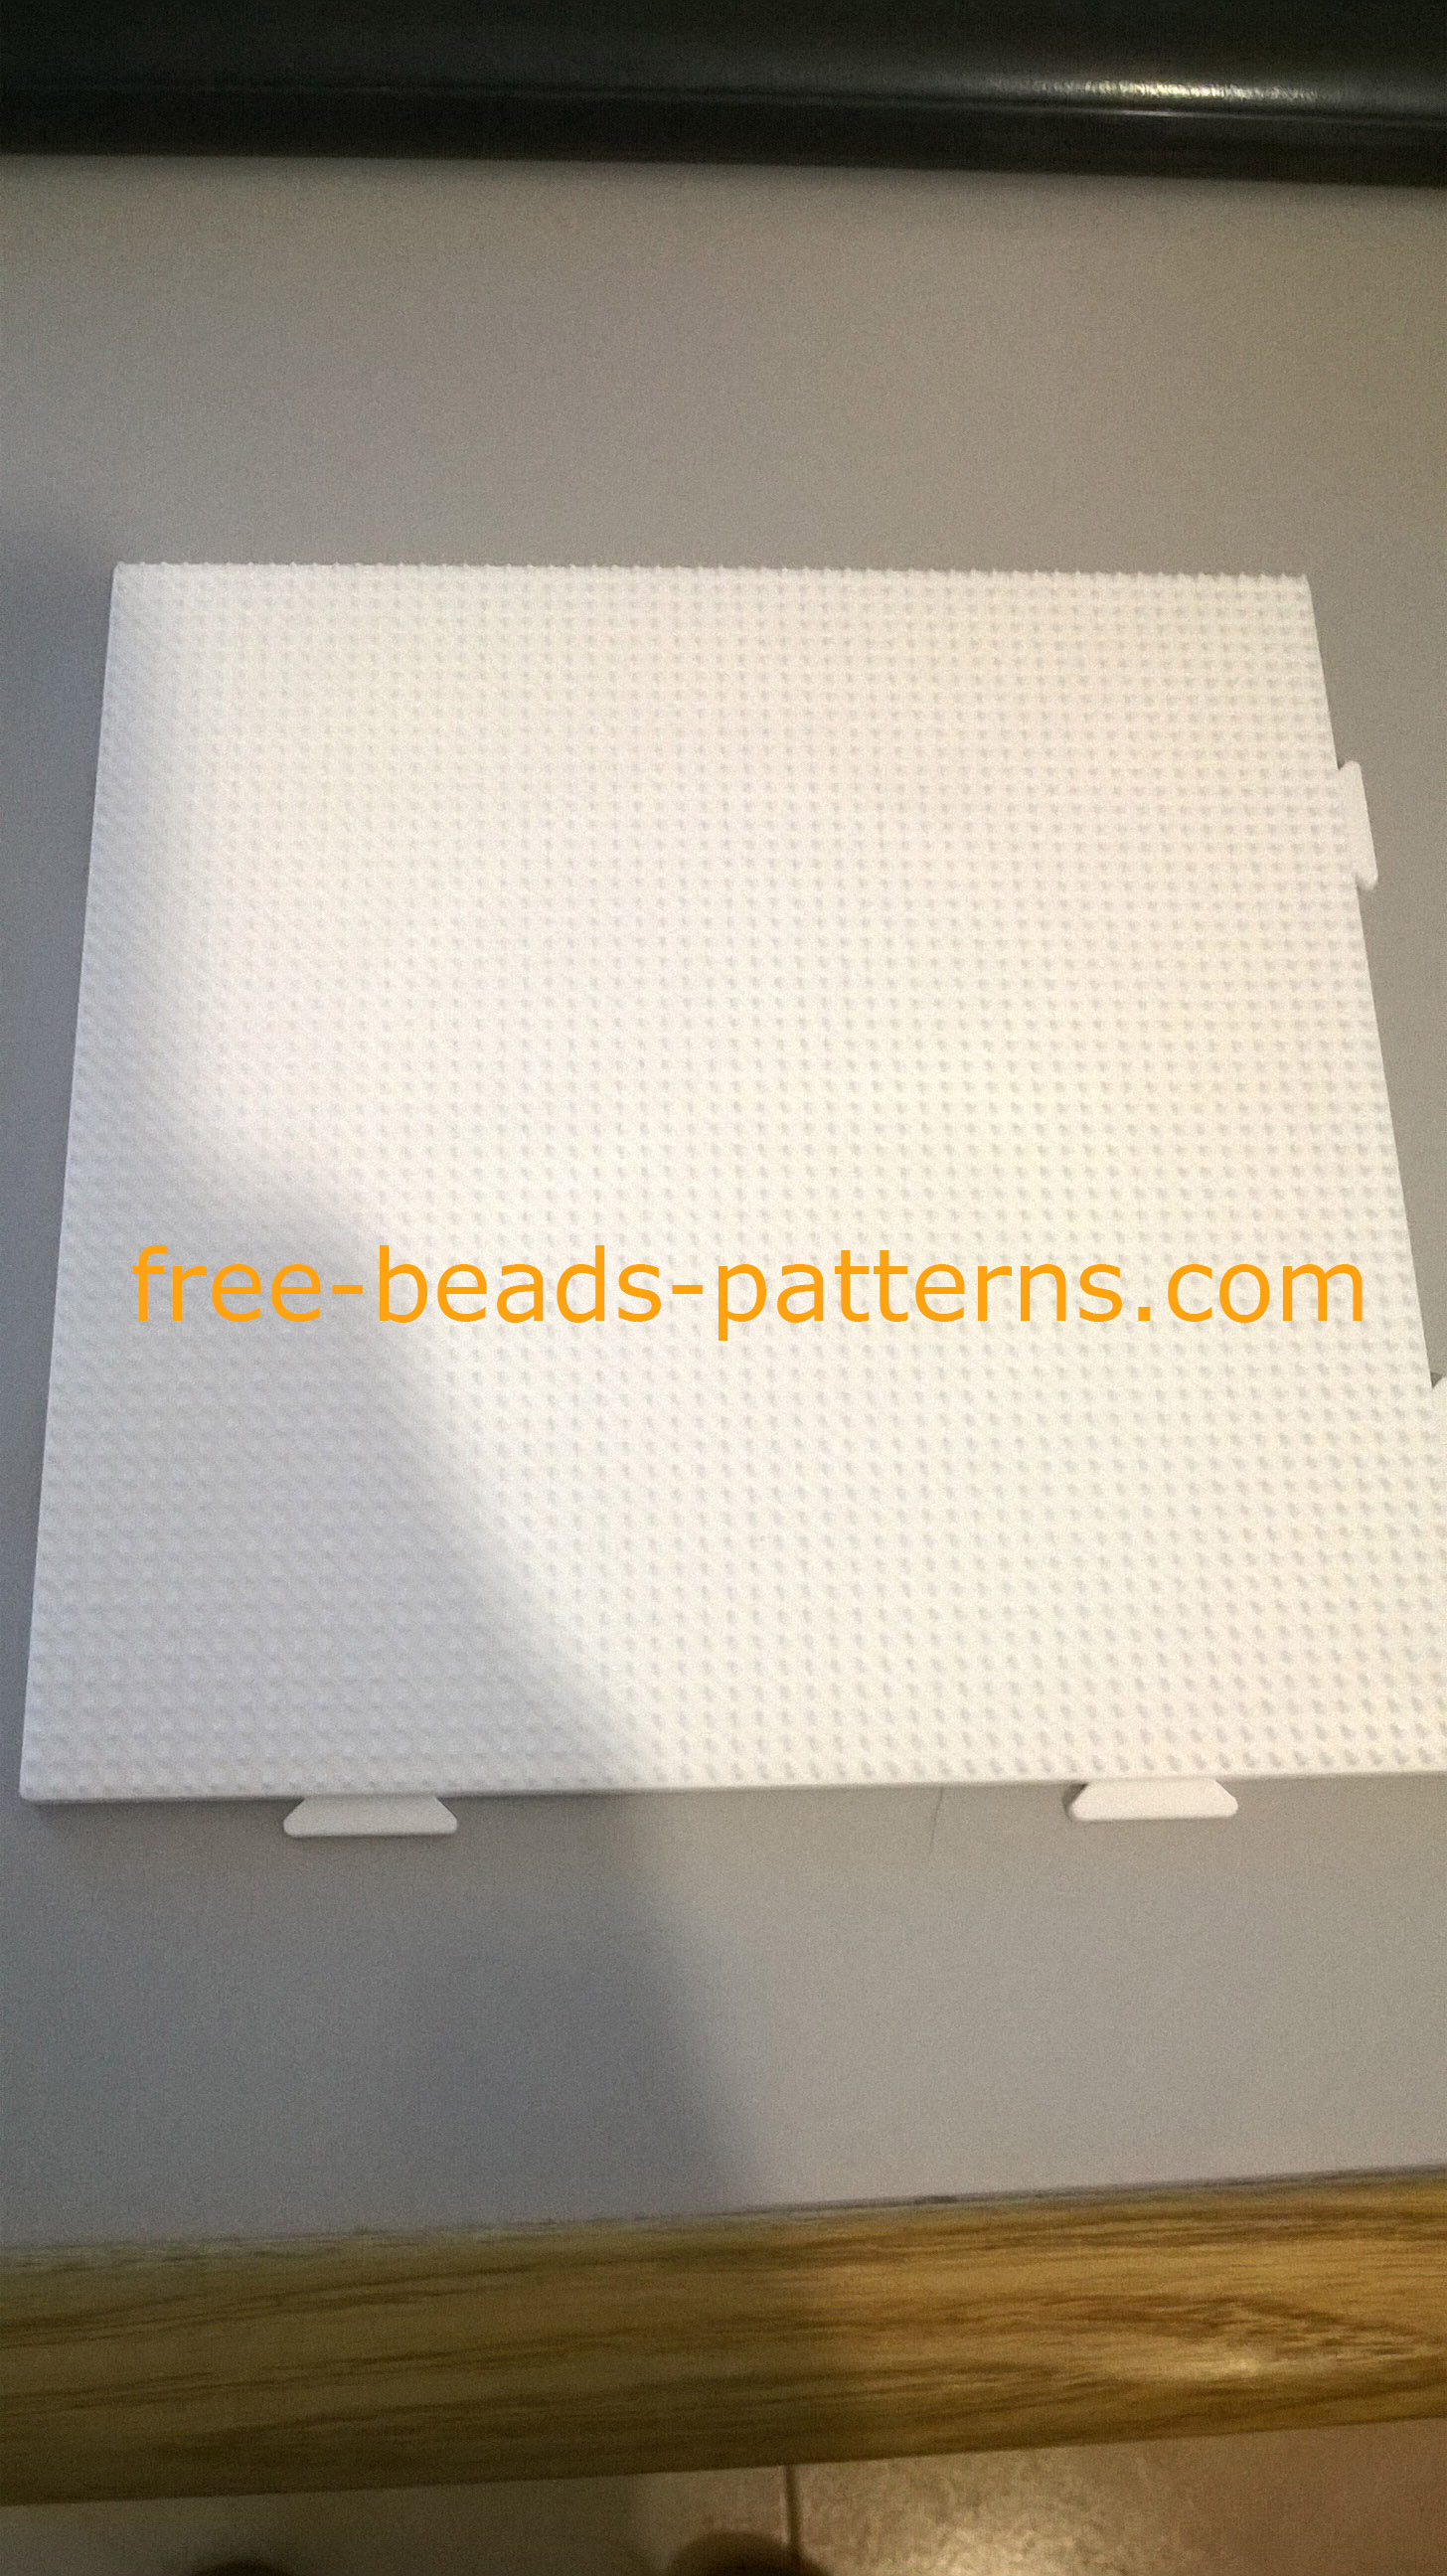 One Hama Beads white pegboard fuse beads supplies photos